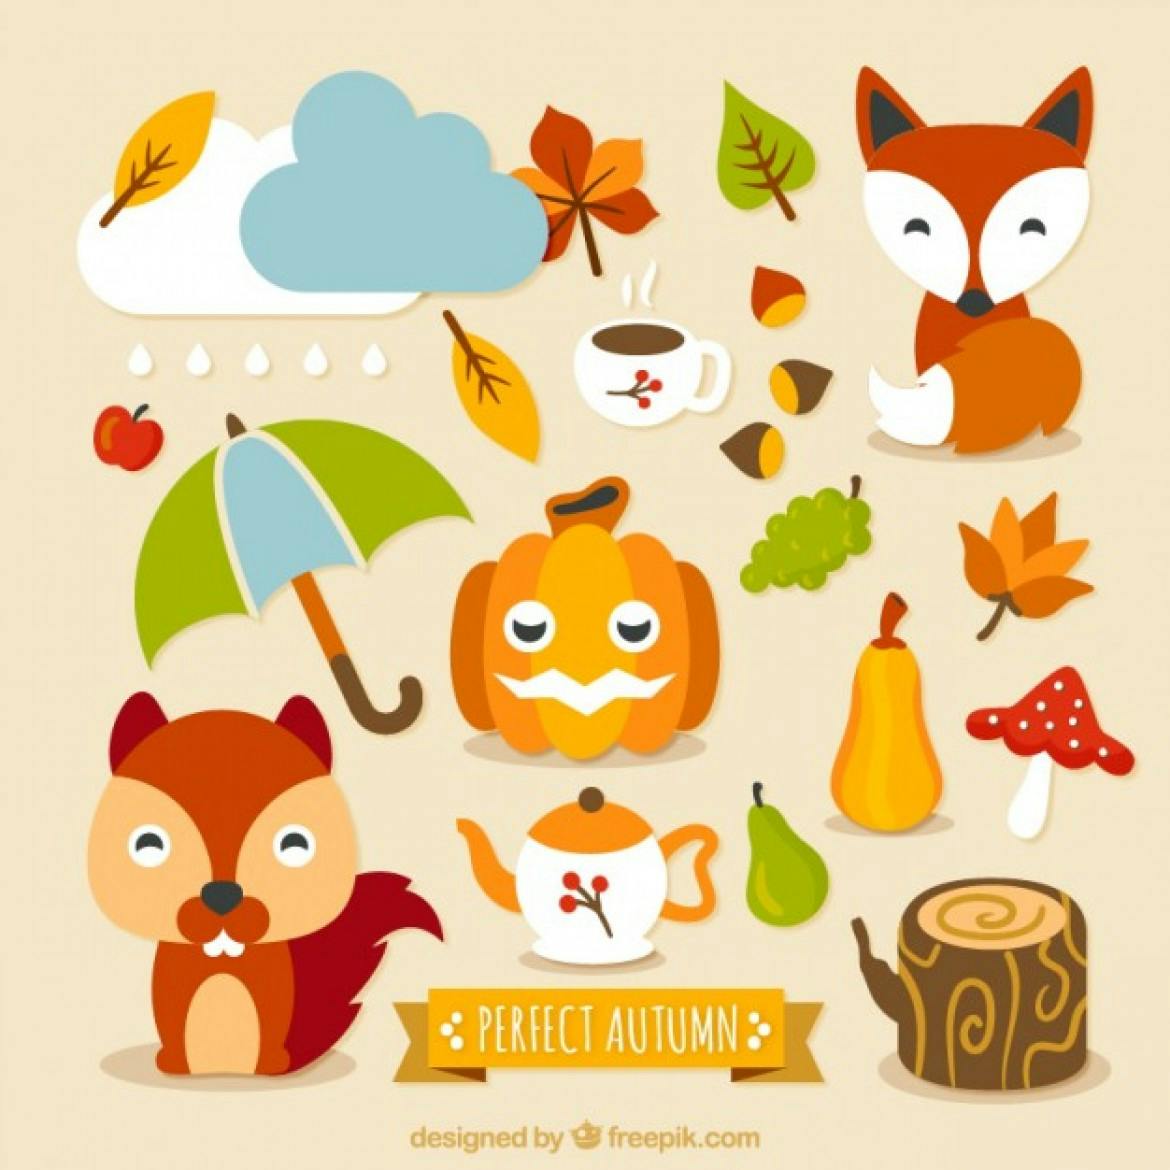 wpid-lovely-autumn-characters-and-elements_23-2147520975-1170x1170